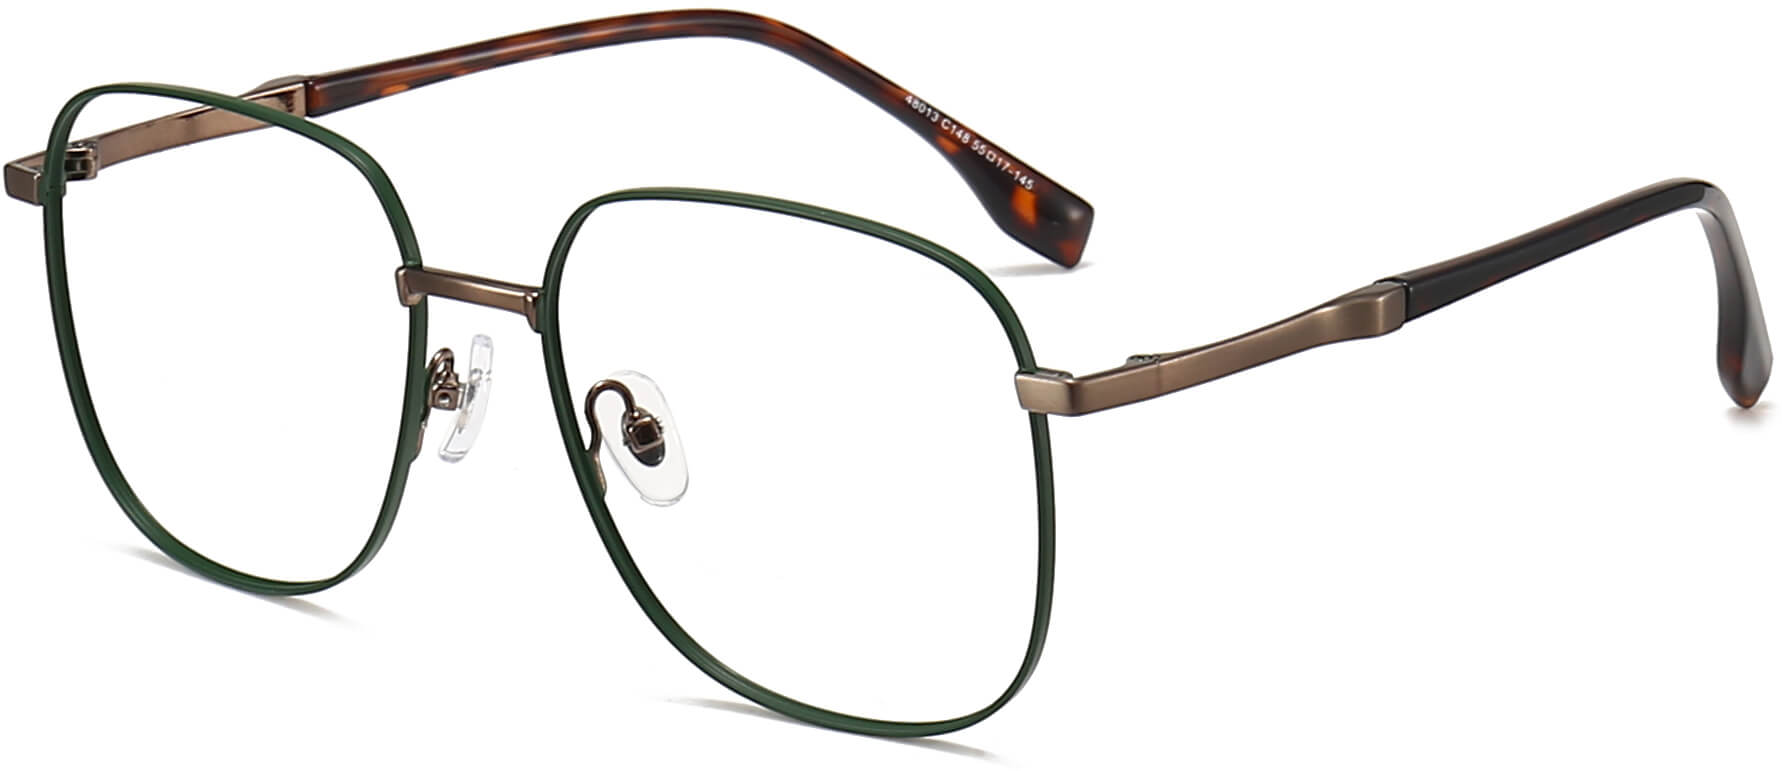 Azariah Square Green Eyeglasses from ANRRI, angle view